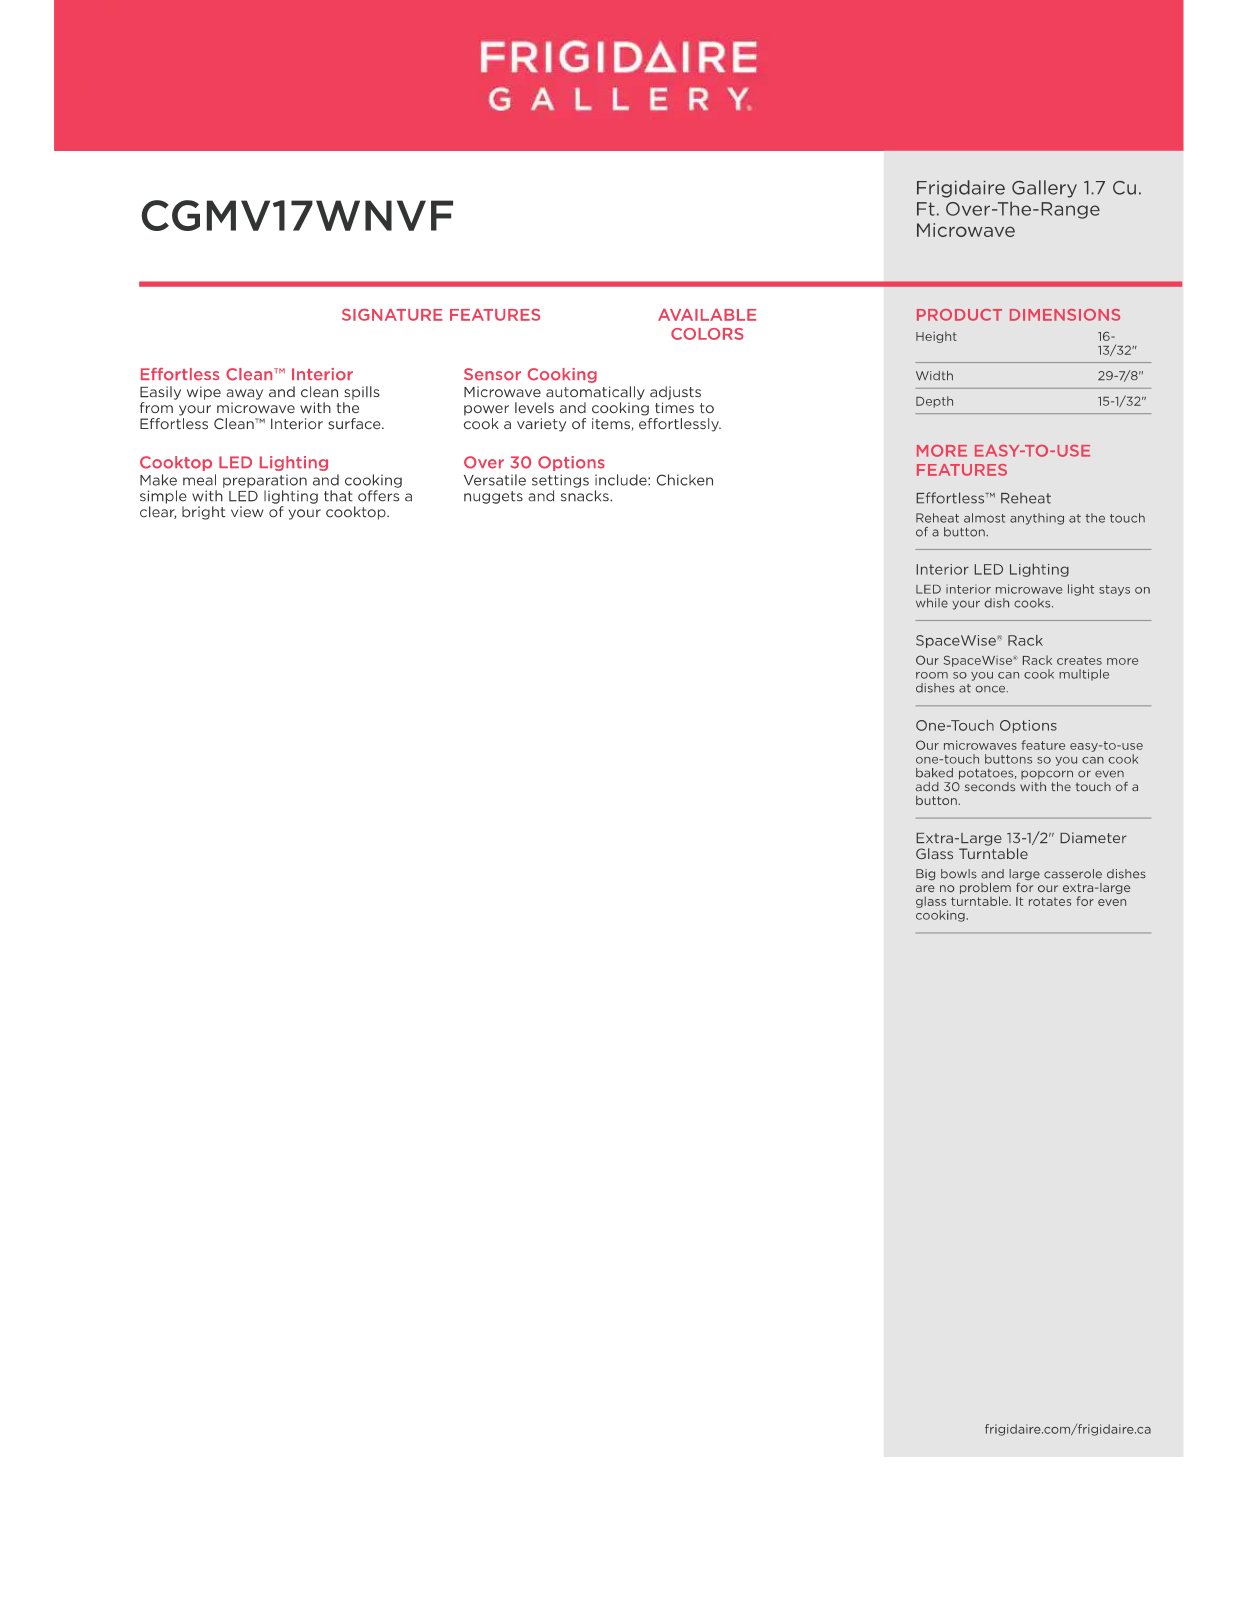 Frigidaire CGMV17WNVF PRODUCT SPECIFICATIONS